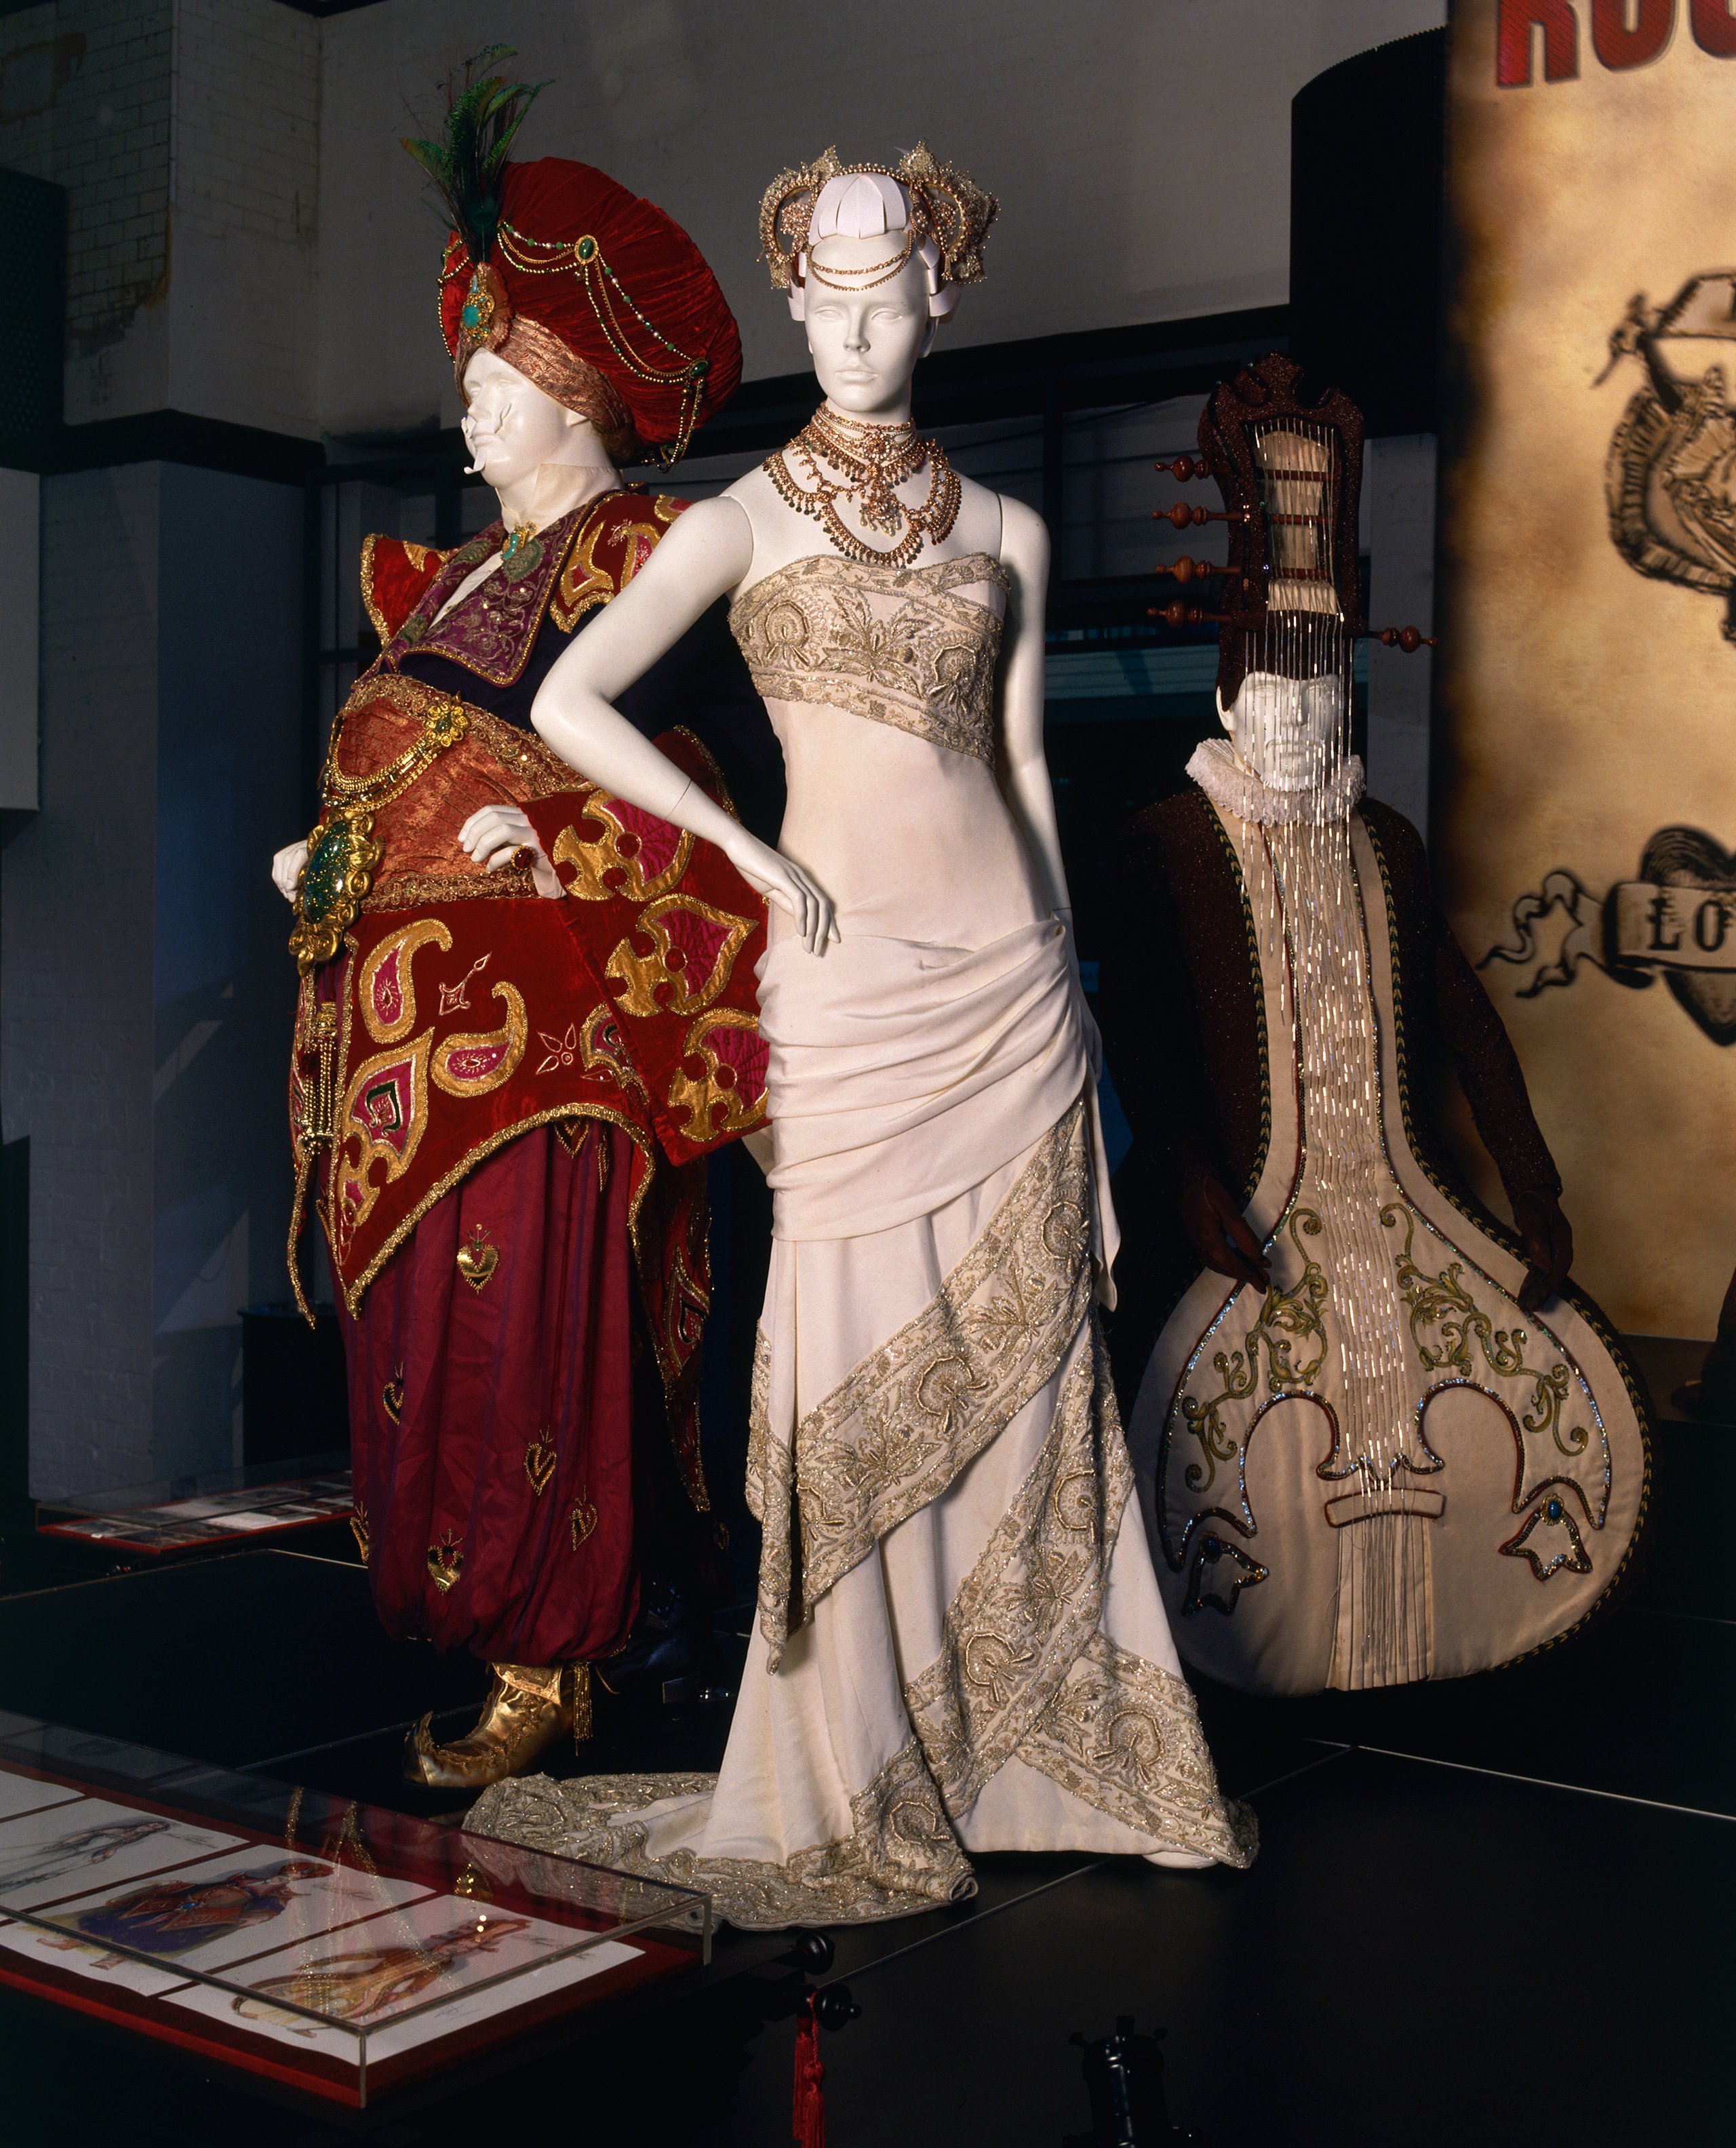 Hindi Wedding costume from the movie Moulin Rouge